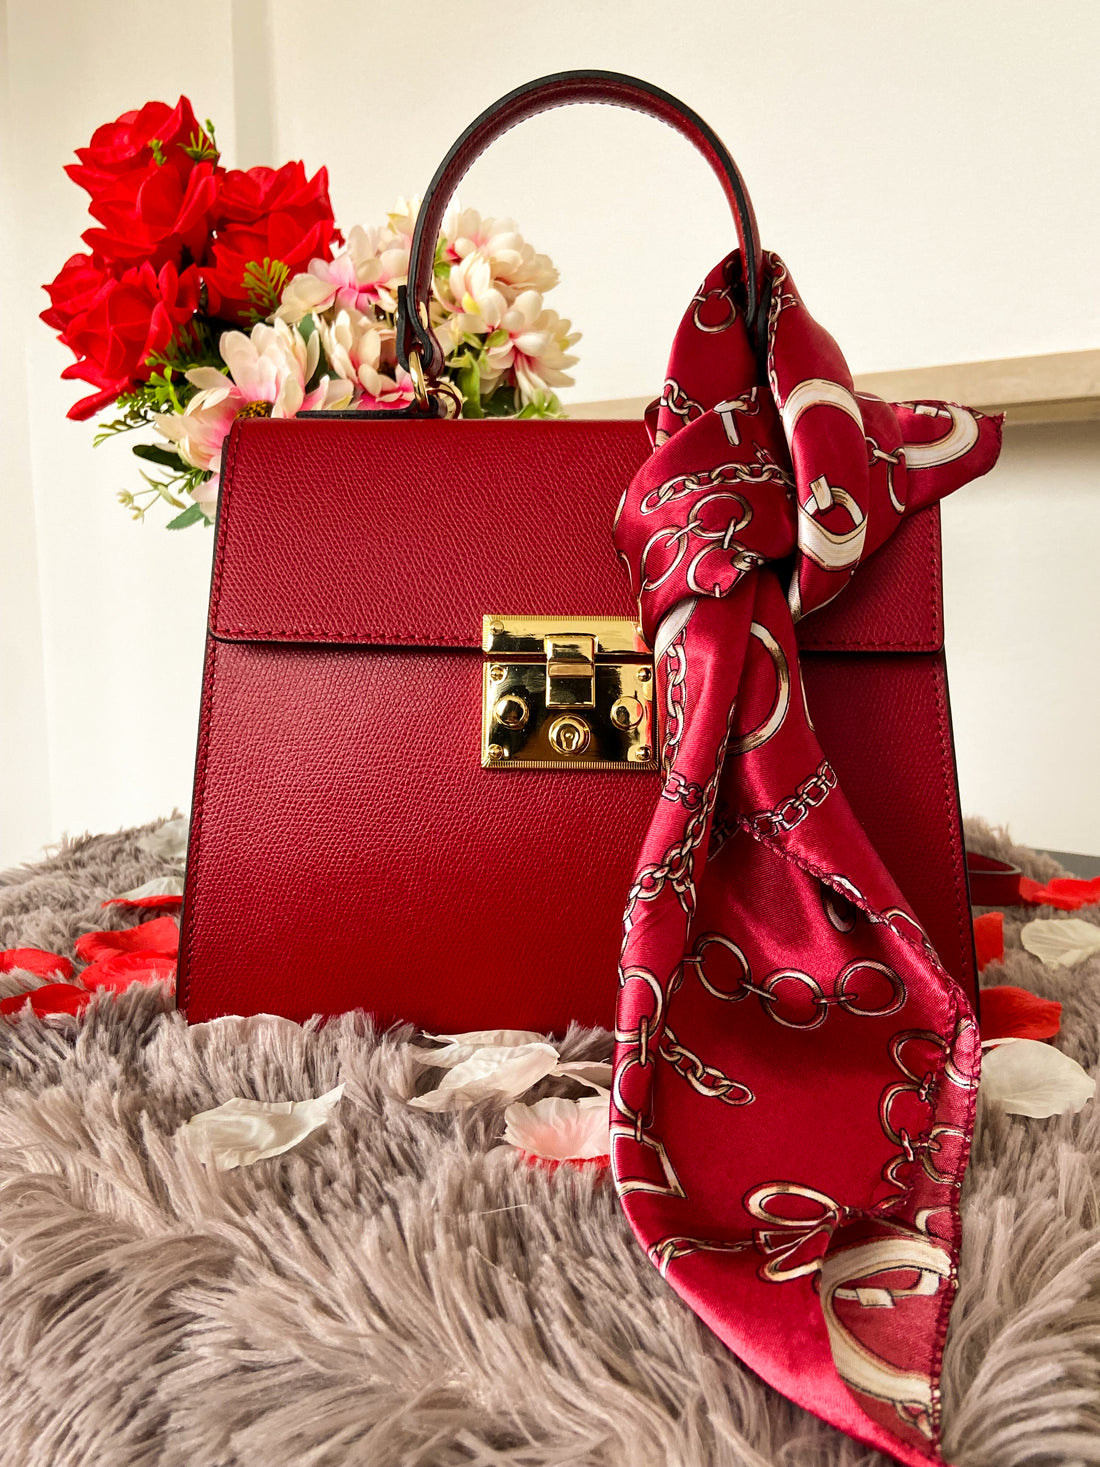 Marigold bag in red saffiano leather